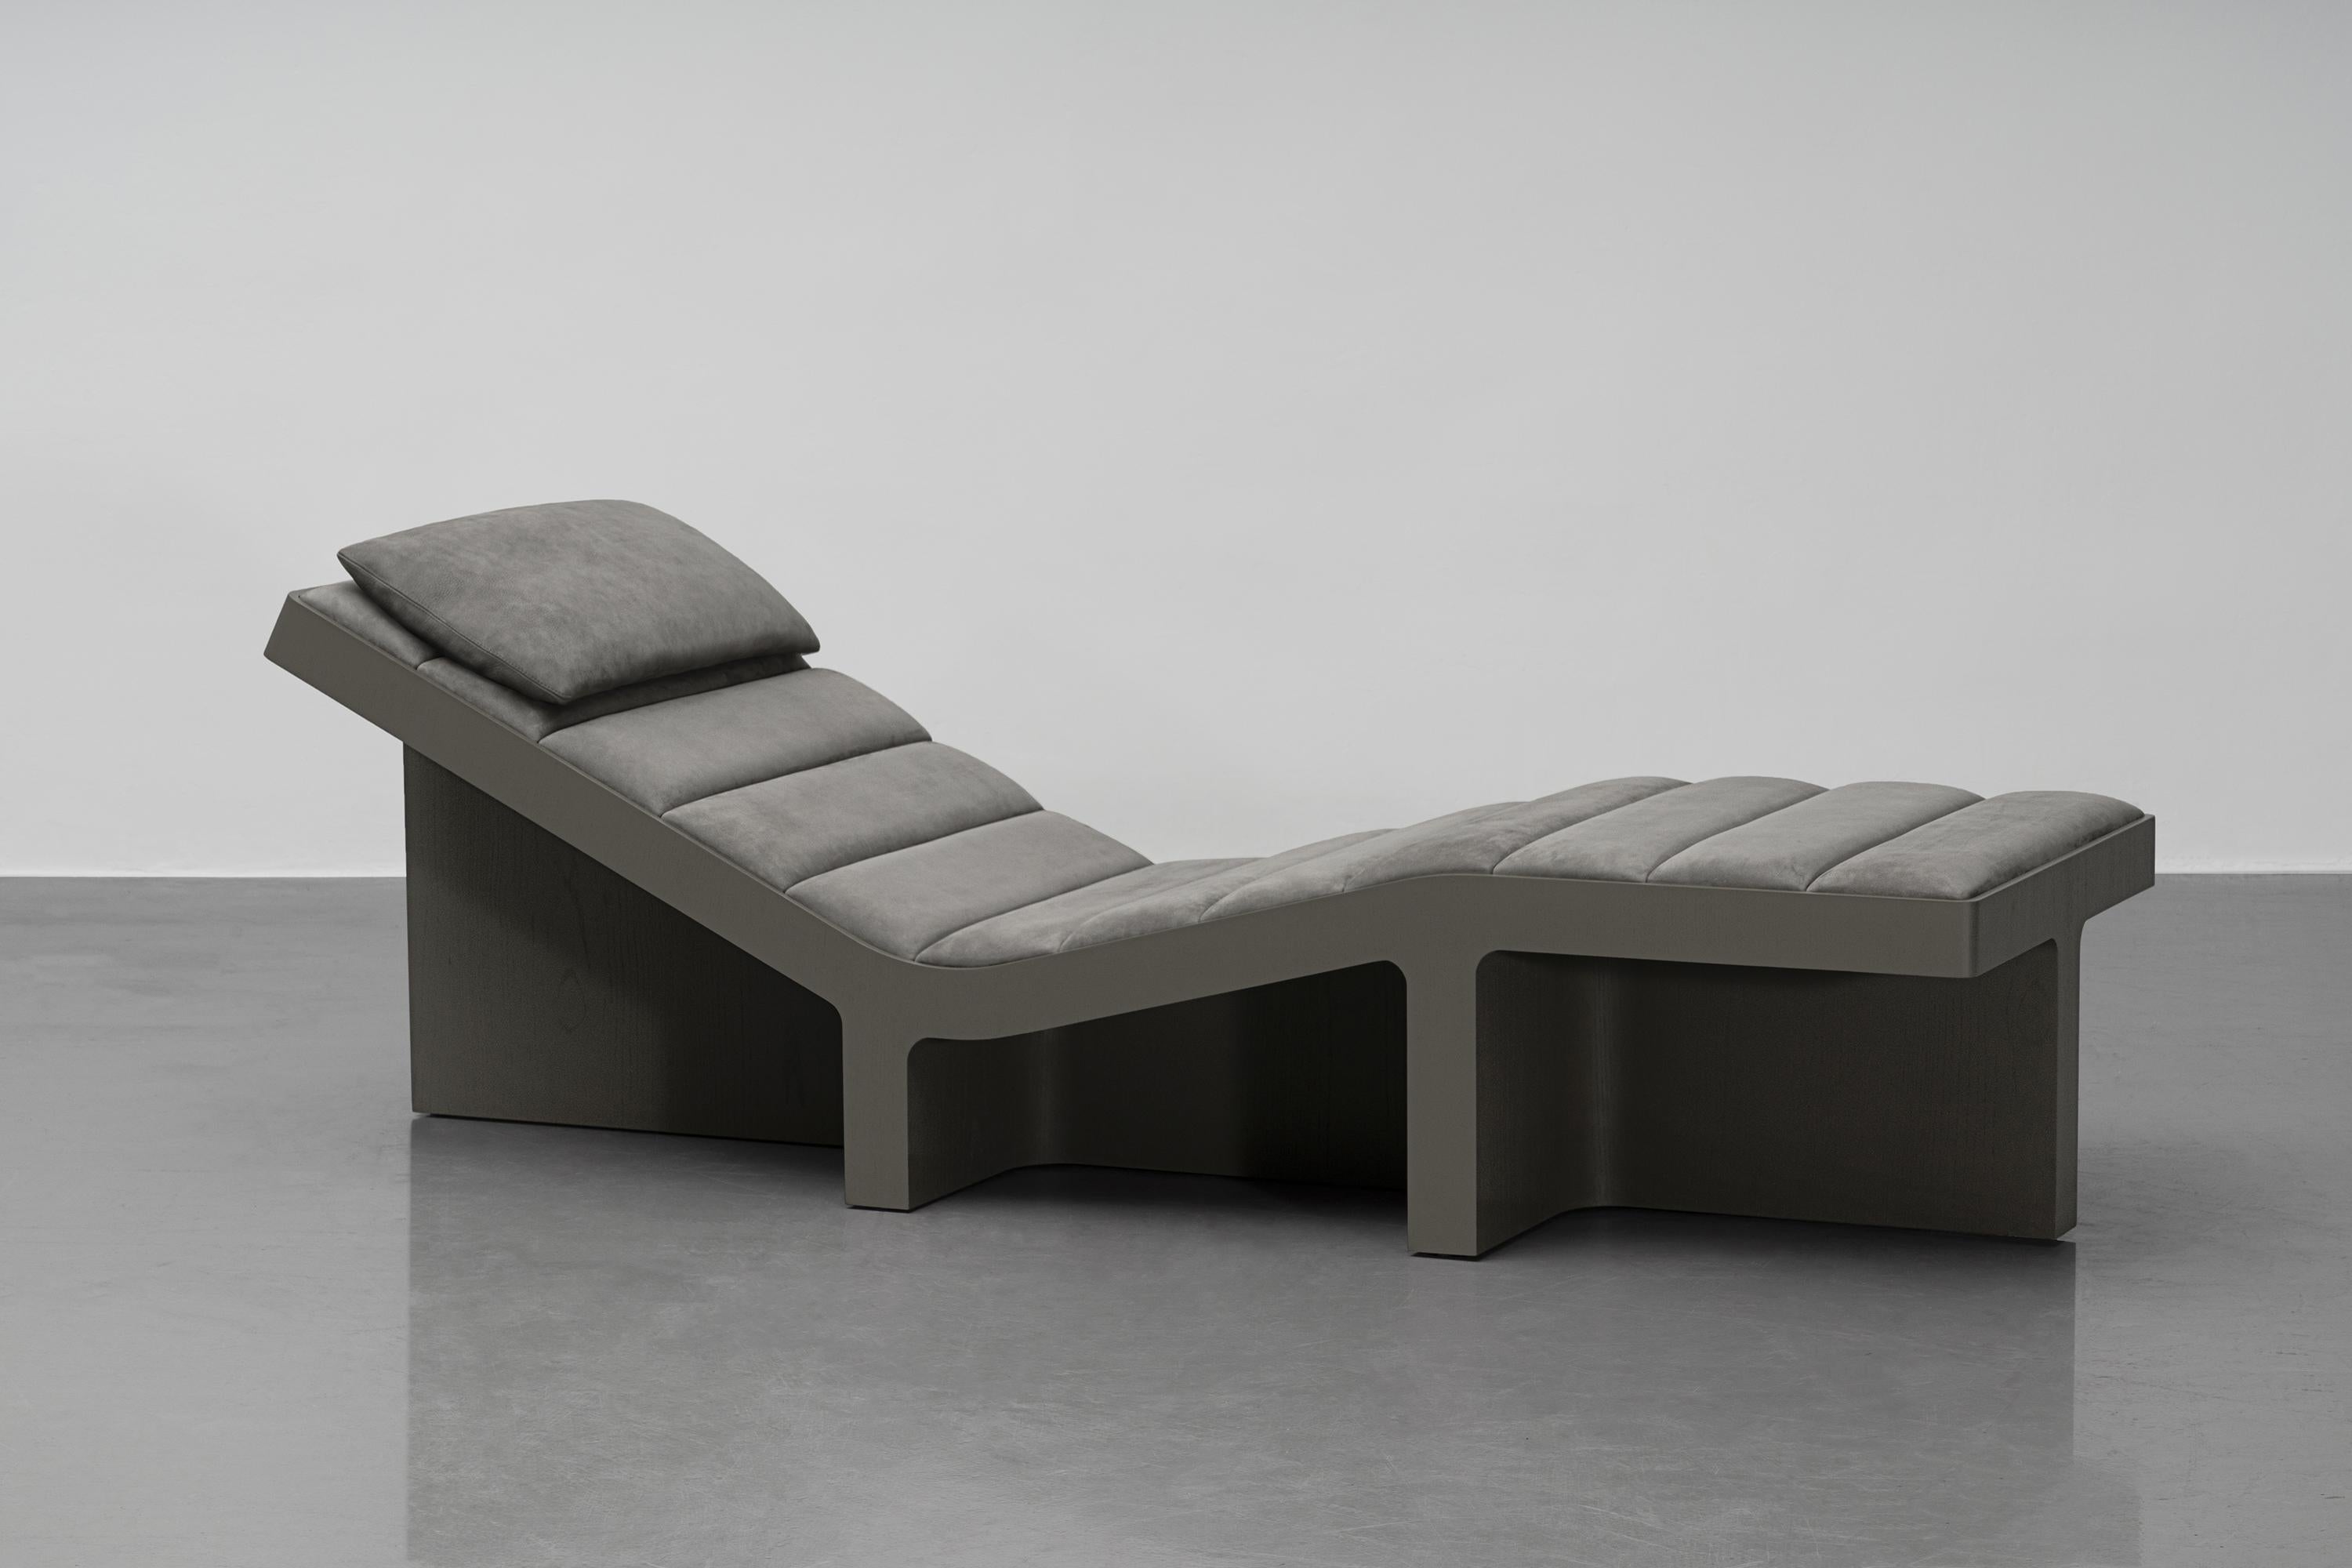 Weight of Shadow Chaise Longue by Atelier V&F
Dimensions: D 70 x W 206 x H 67 cm. Seat Height: 46.5 cm.
Materials: Ash and Nubuck.

Available in black or grey. Please contact us.

The weightiness and the fine curves of the blocks which are